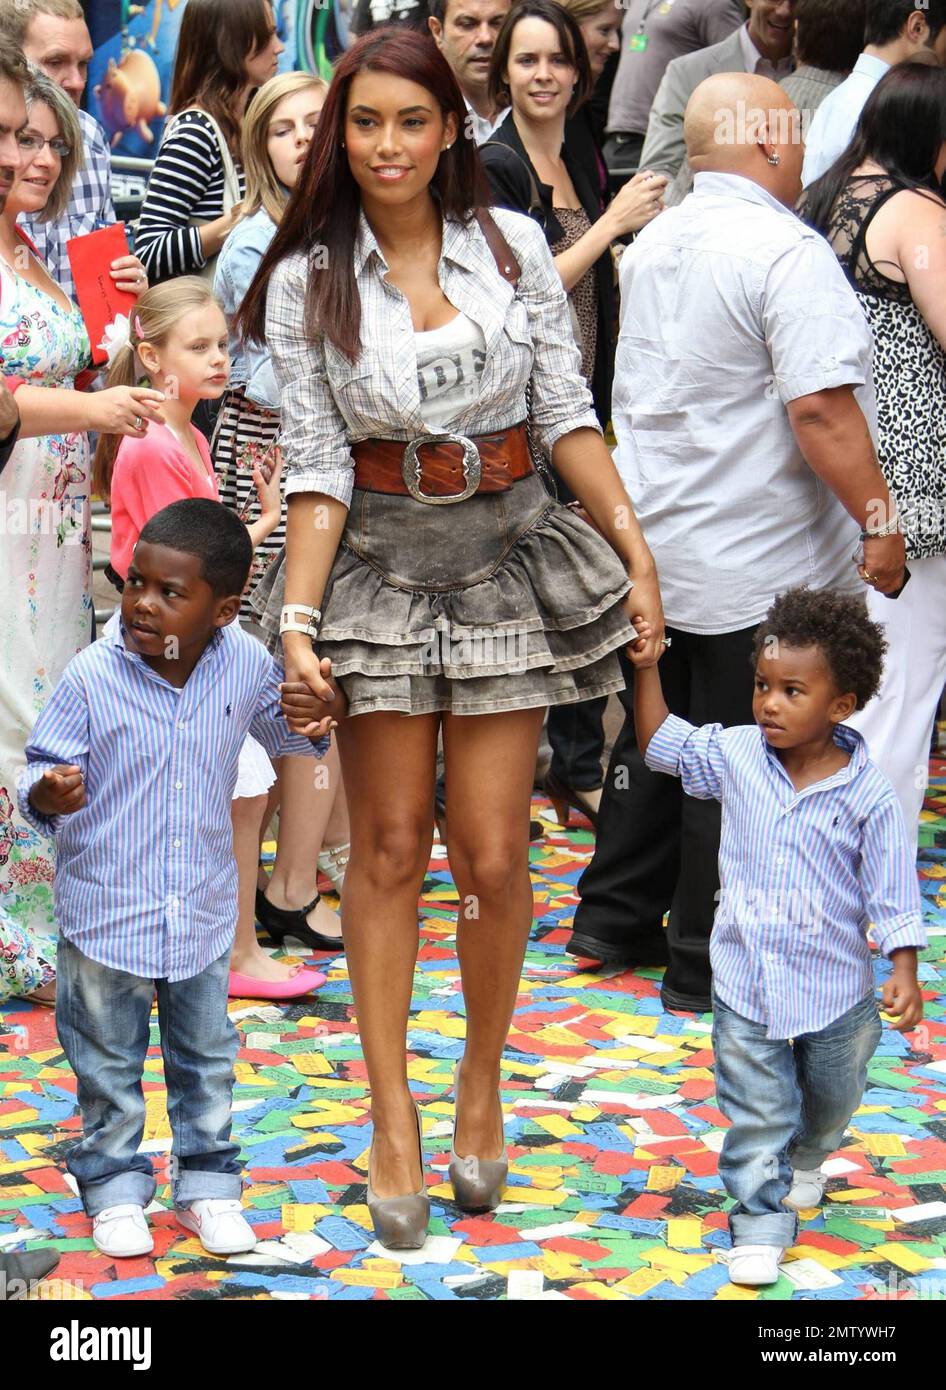 Chantelle Tagoe, fiancee of English footballer Emile Heskey, walks the multicolor carpet with her and Heskey's children at Empire Leicester Square for the UK premiere of Disney and Pixar's 'Toy Story 3'.  The third installment in the Toy Story series has so far received positive reviews since its June release in North America and has proved popular in the toy and video game world with Mattel, Wii, Xbox 360 and PS3 all creating products based on the lovable film characters. London, UK. 07/18/10.    . Stock Photo